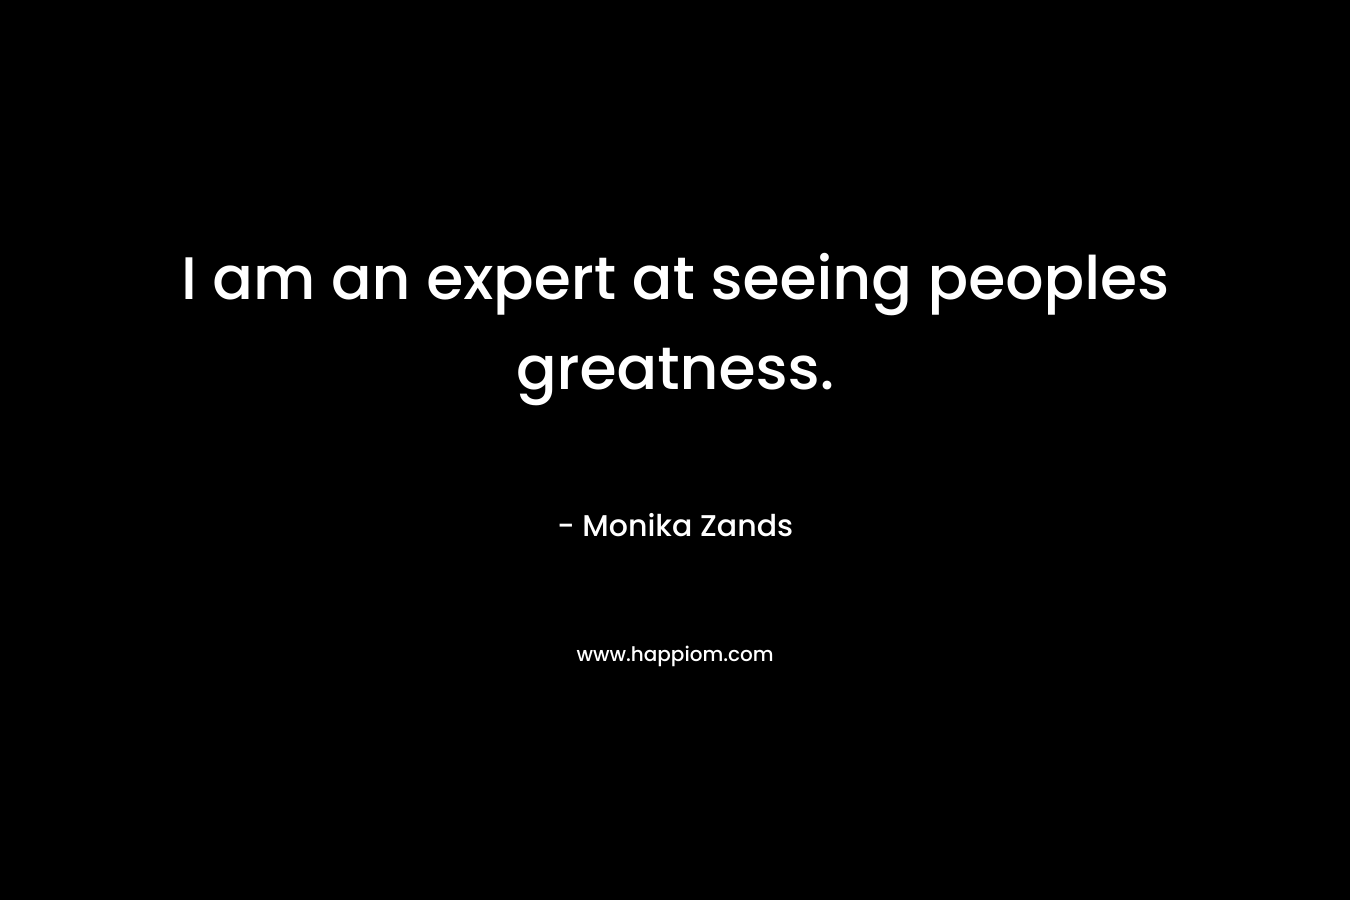 I am an expert at seeing peoples greatness. – Monika Zands